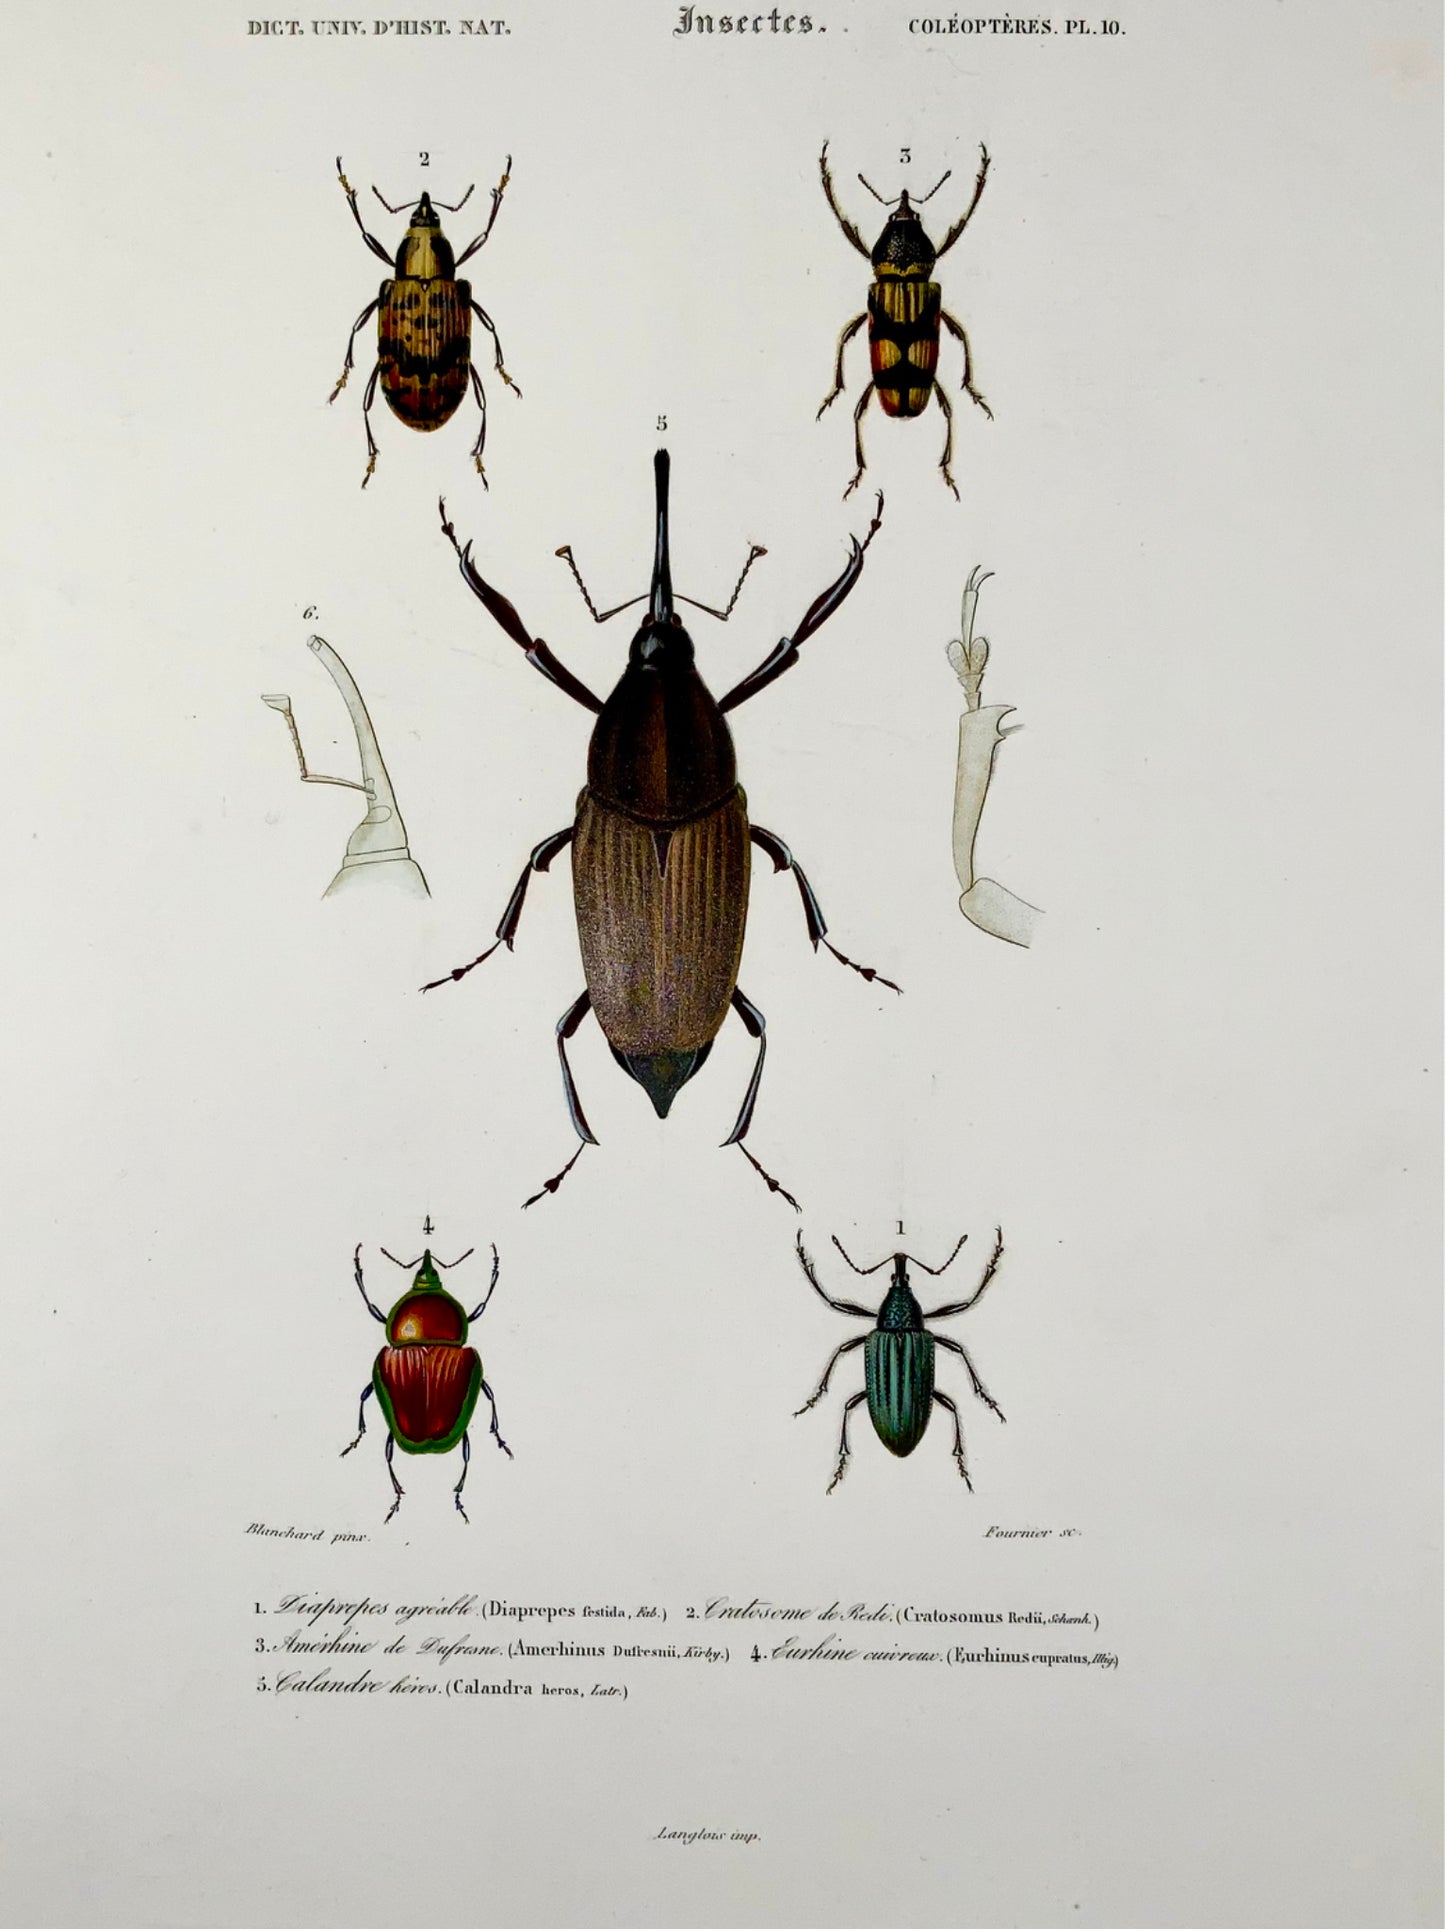 1849 Fournier, Blanchard, Beetles, exquisite hand colour, folio, insects